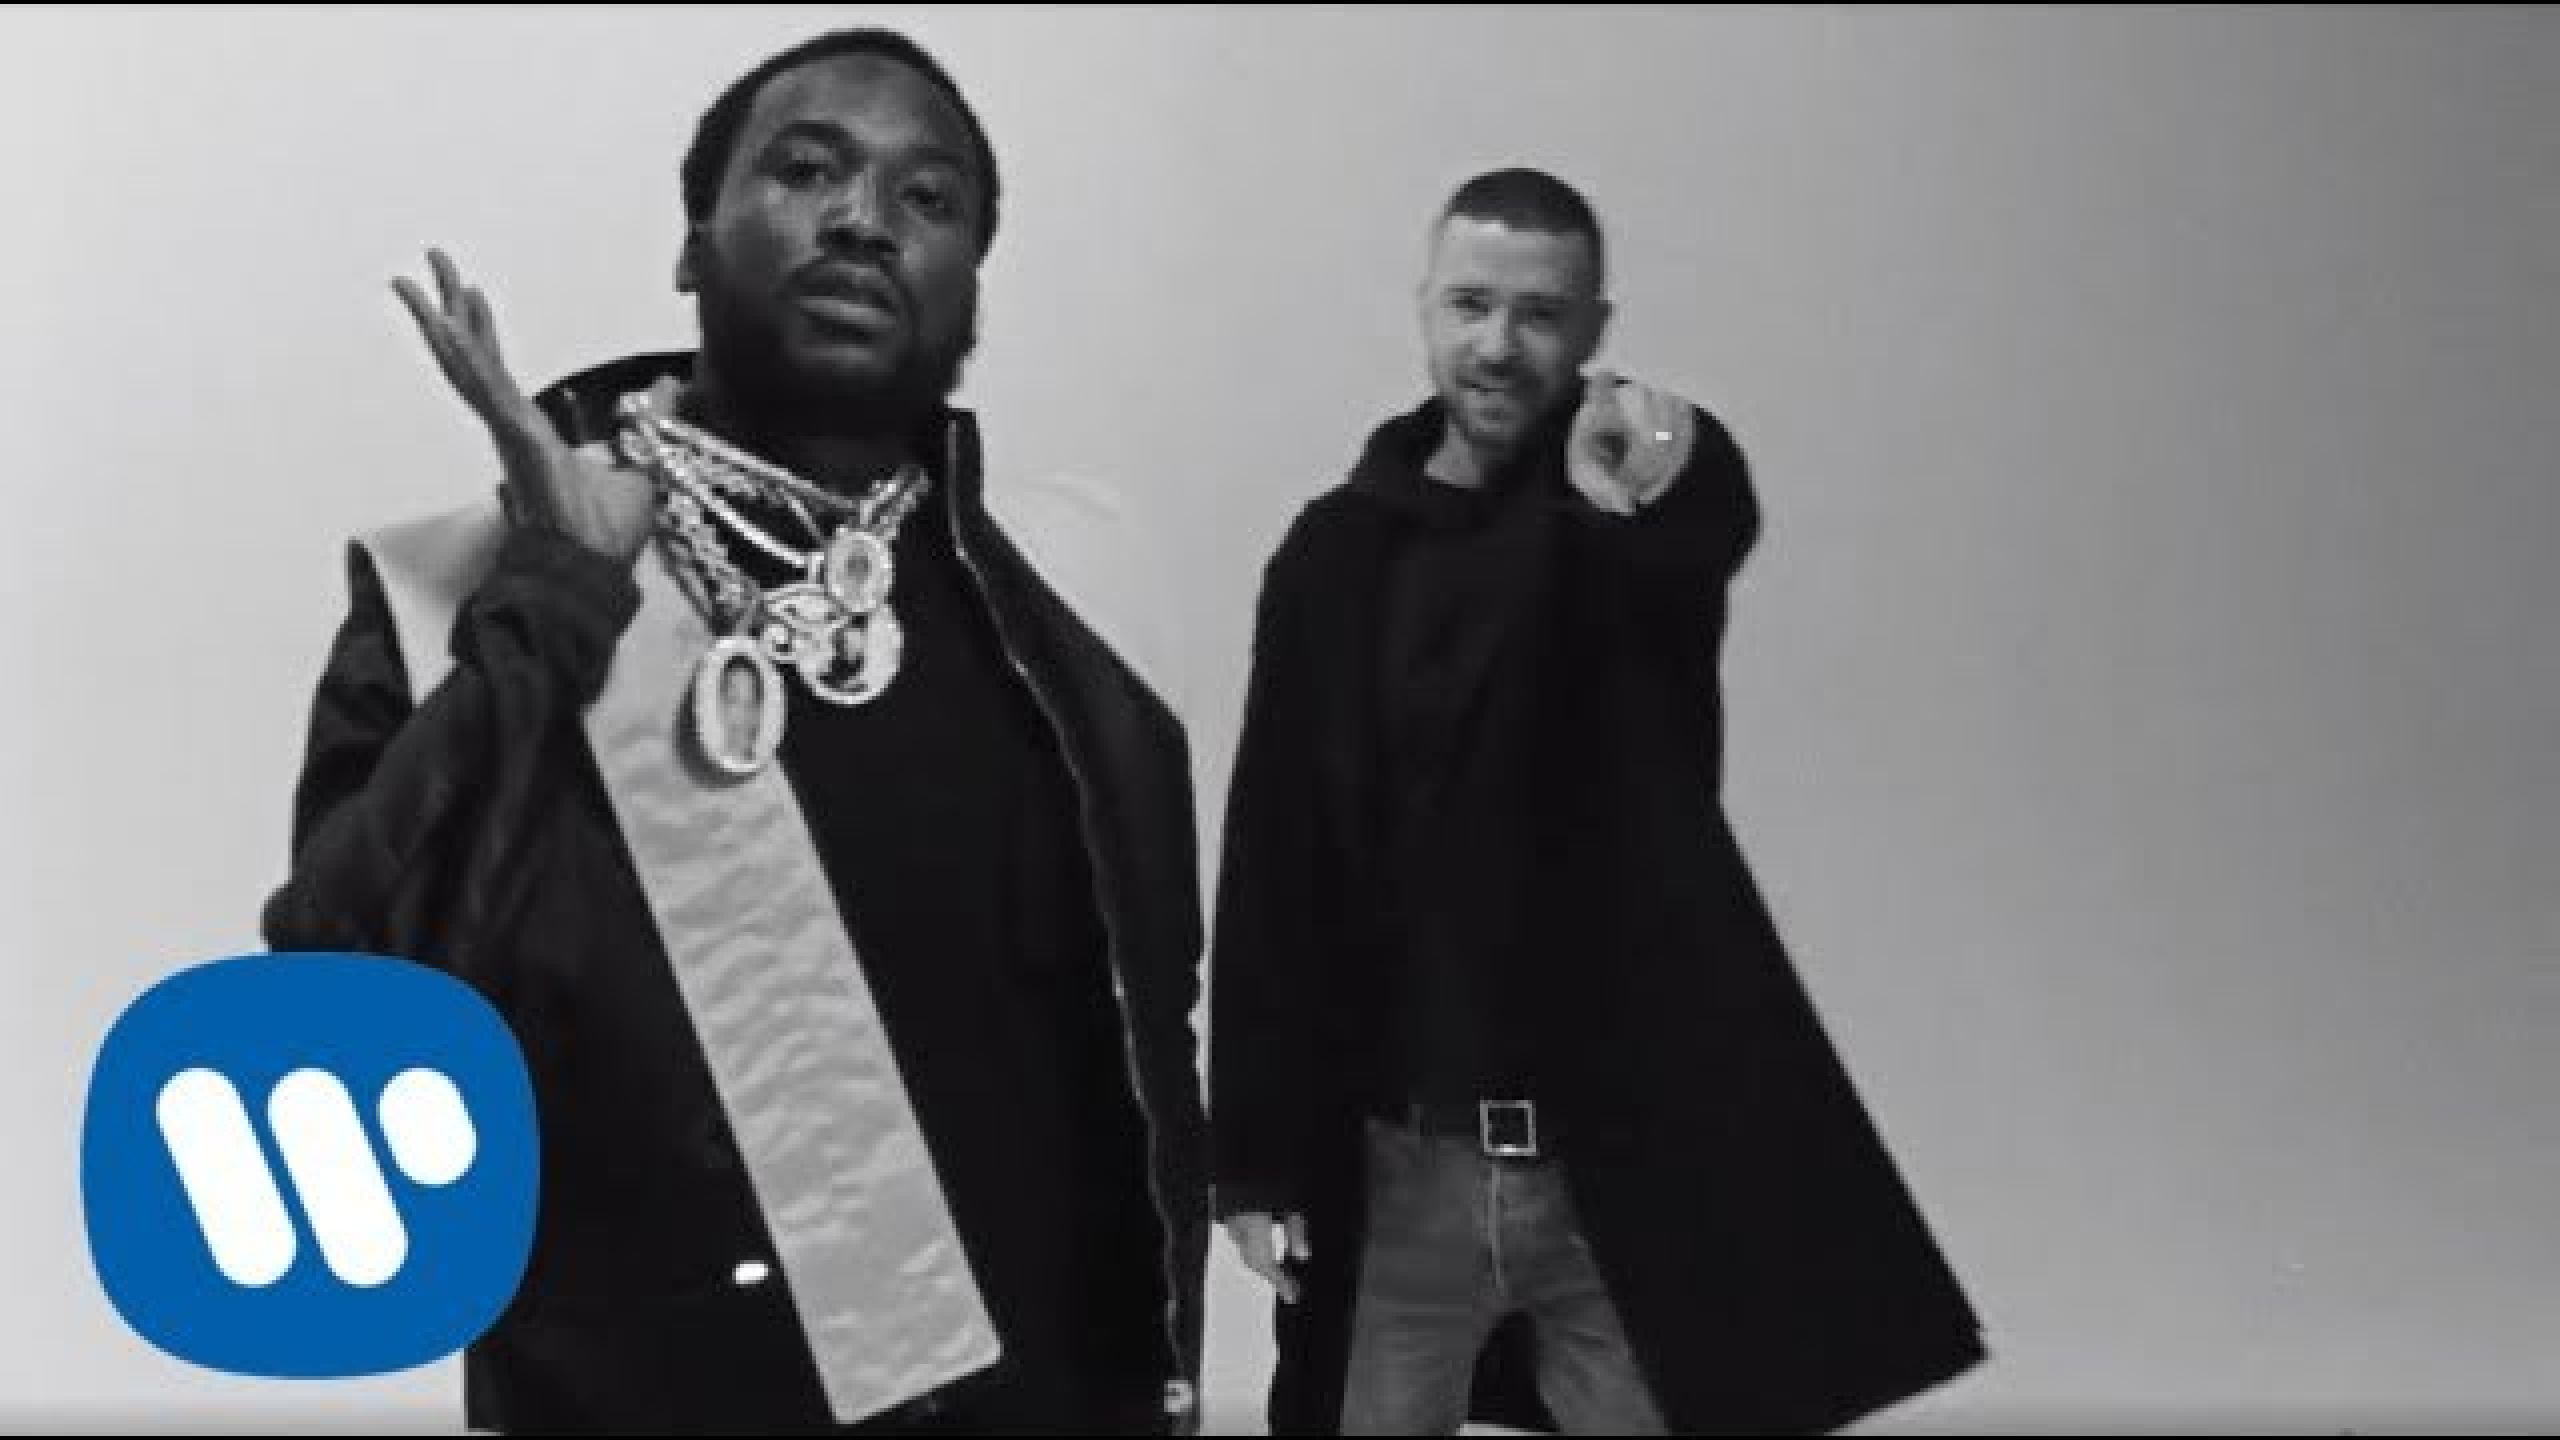 Meek Mill - Believe (feat. Justin Timberlake) [Official Music Video]